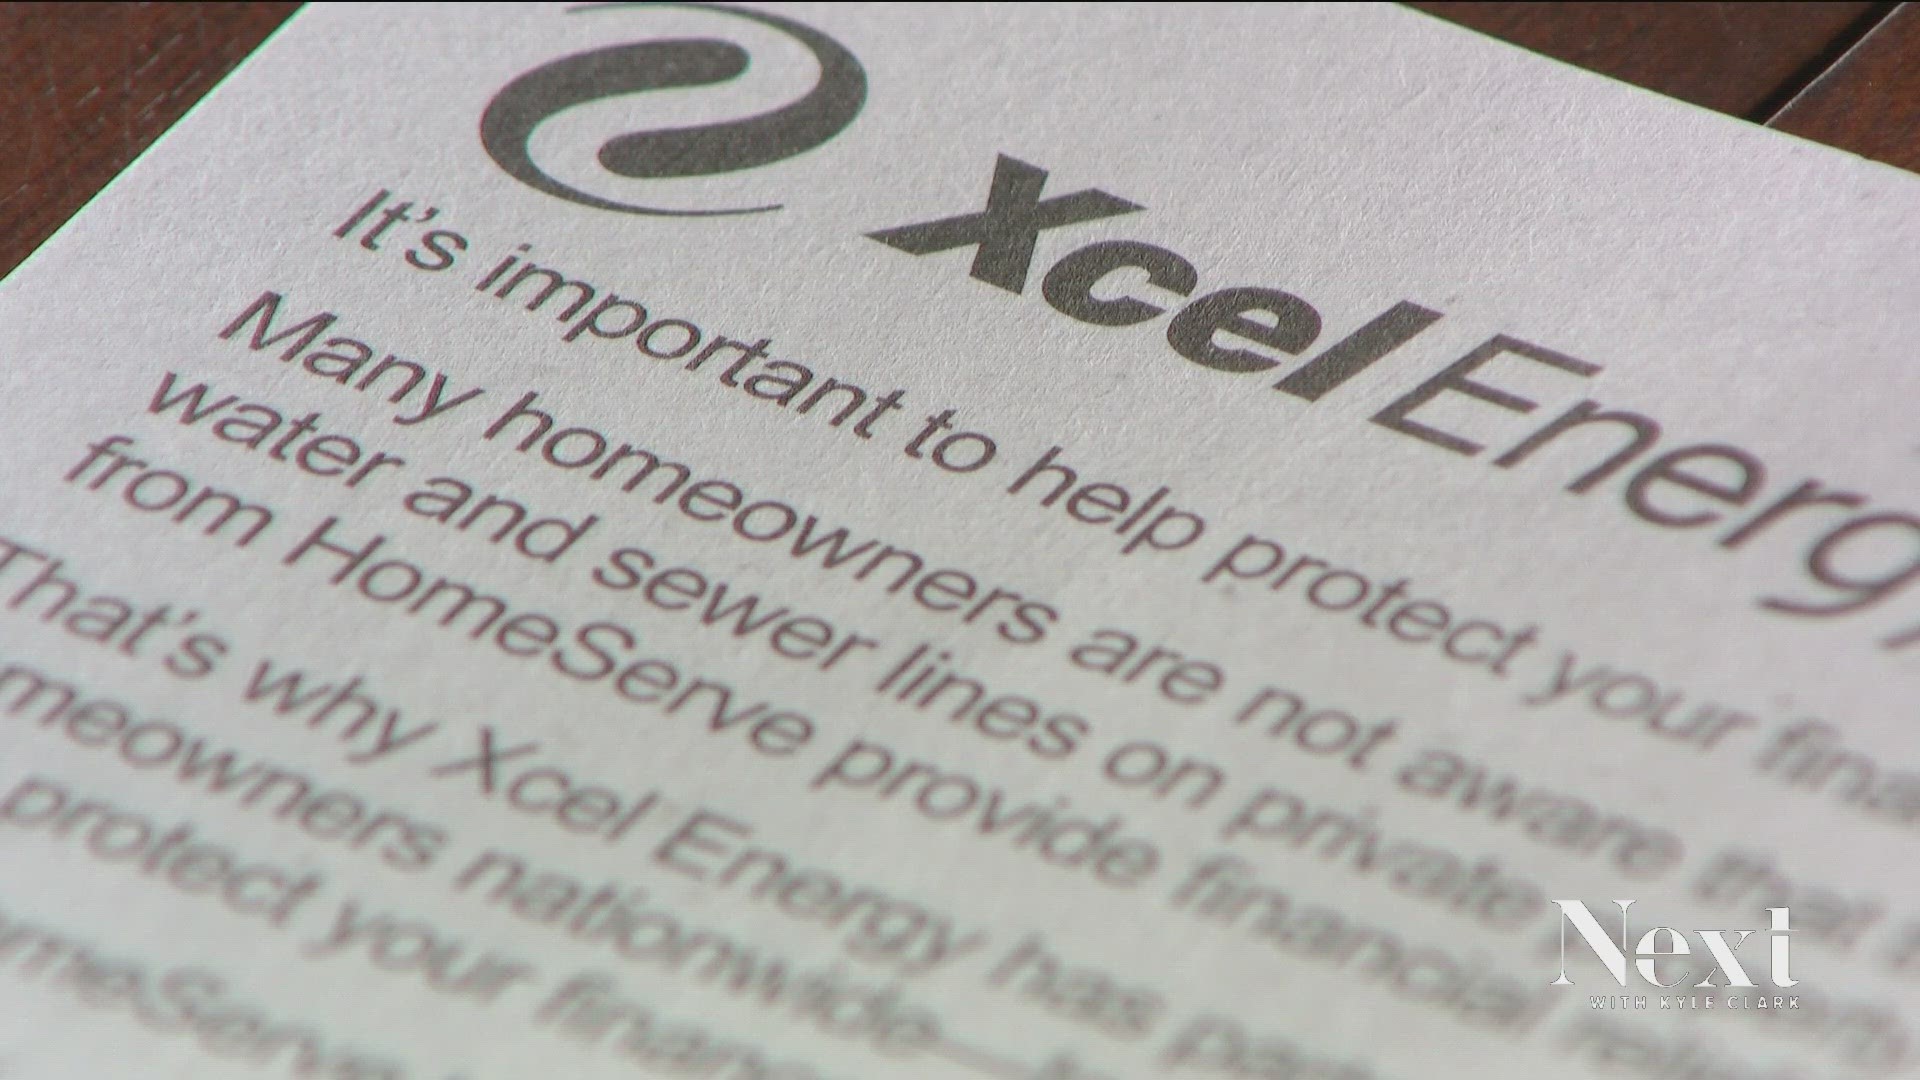 Xcel said the company approves the mailers that are co-branded with HomeServe to explain the protection plan's value to customers.